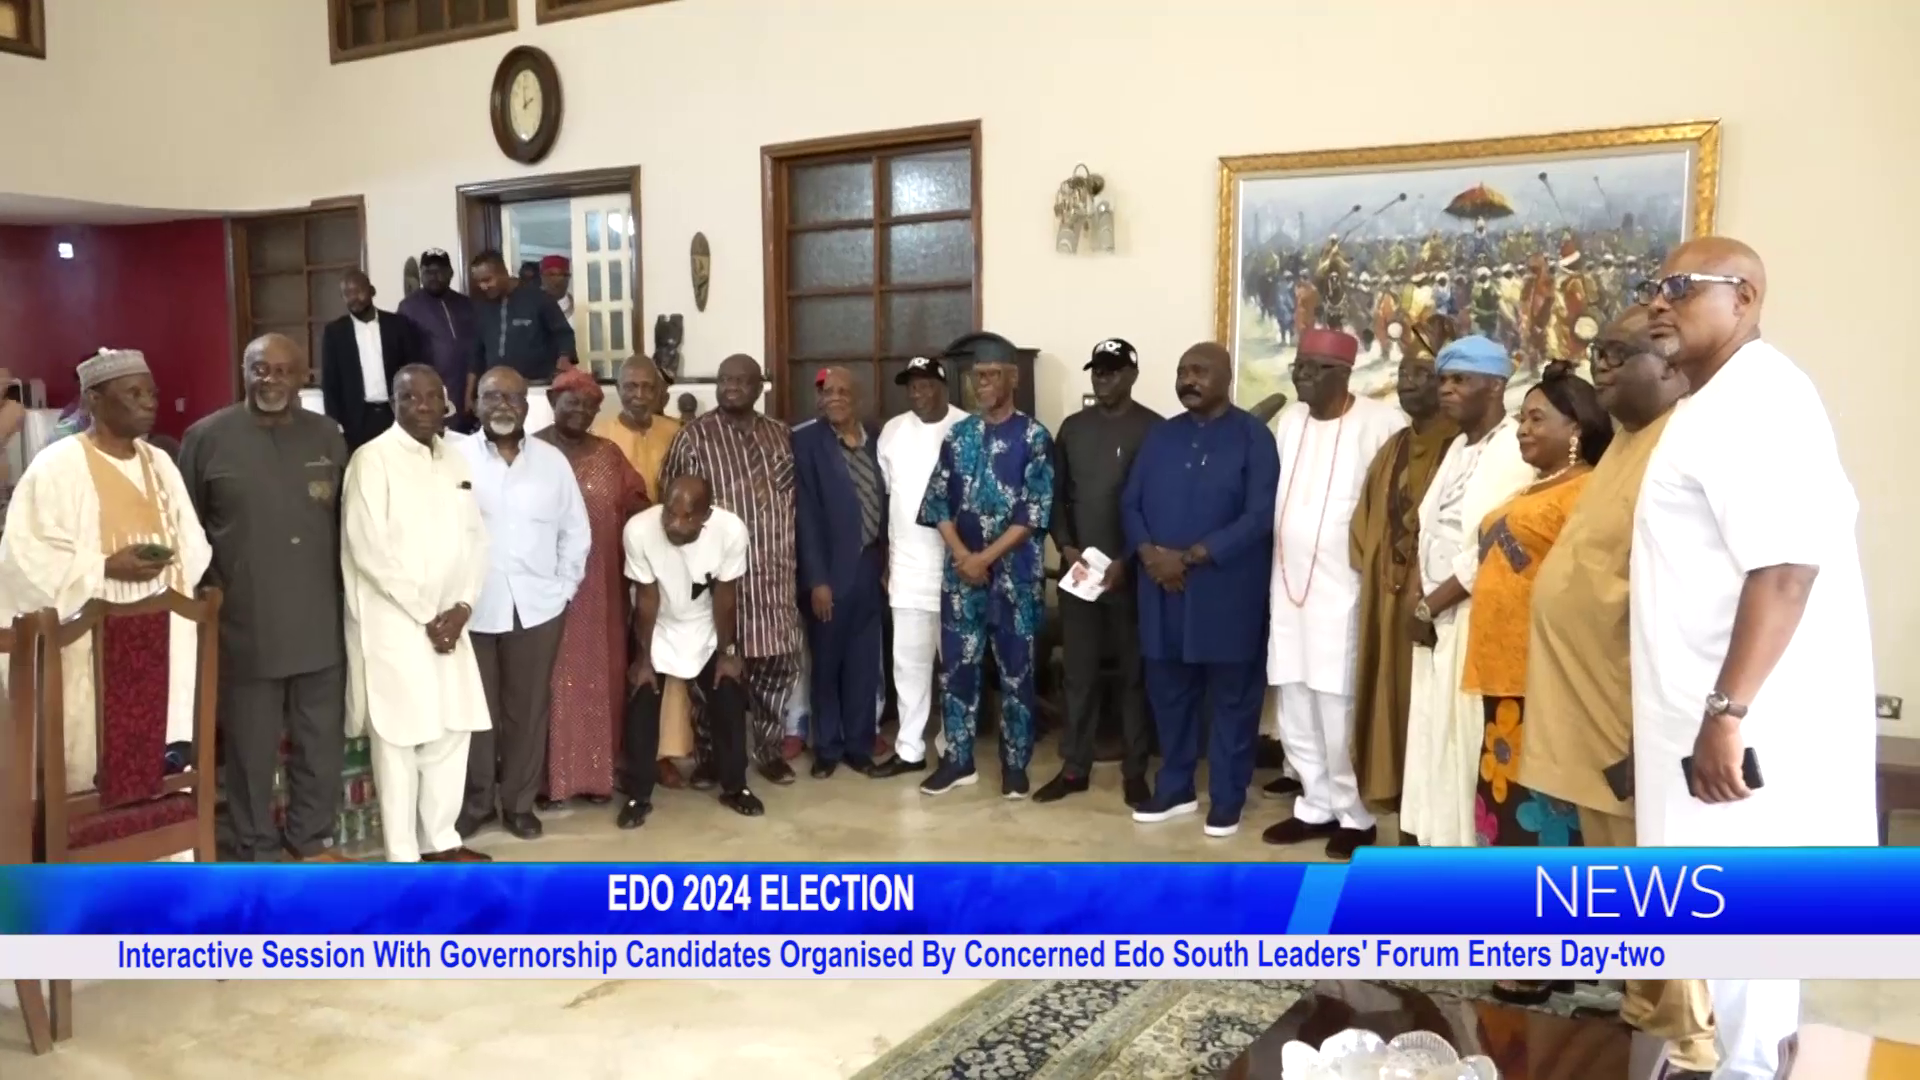 Interactive Session With Governorship Candidates Organised By Concerned Edo South Leaders’ Forum Enters Day-two